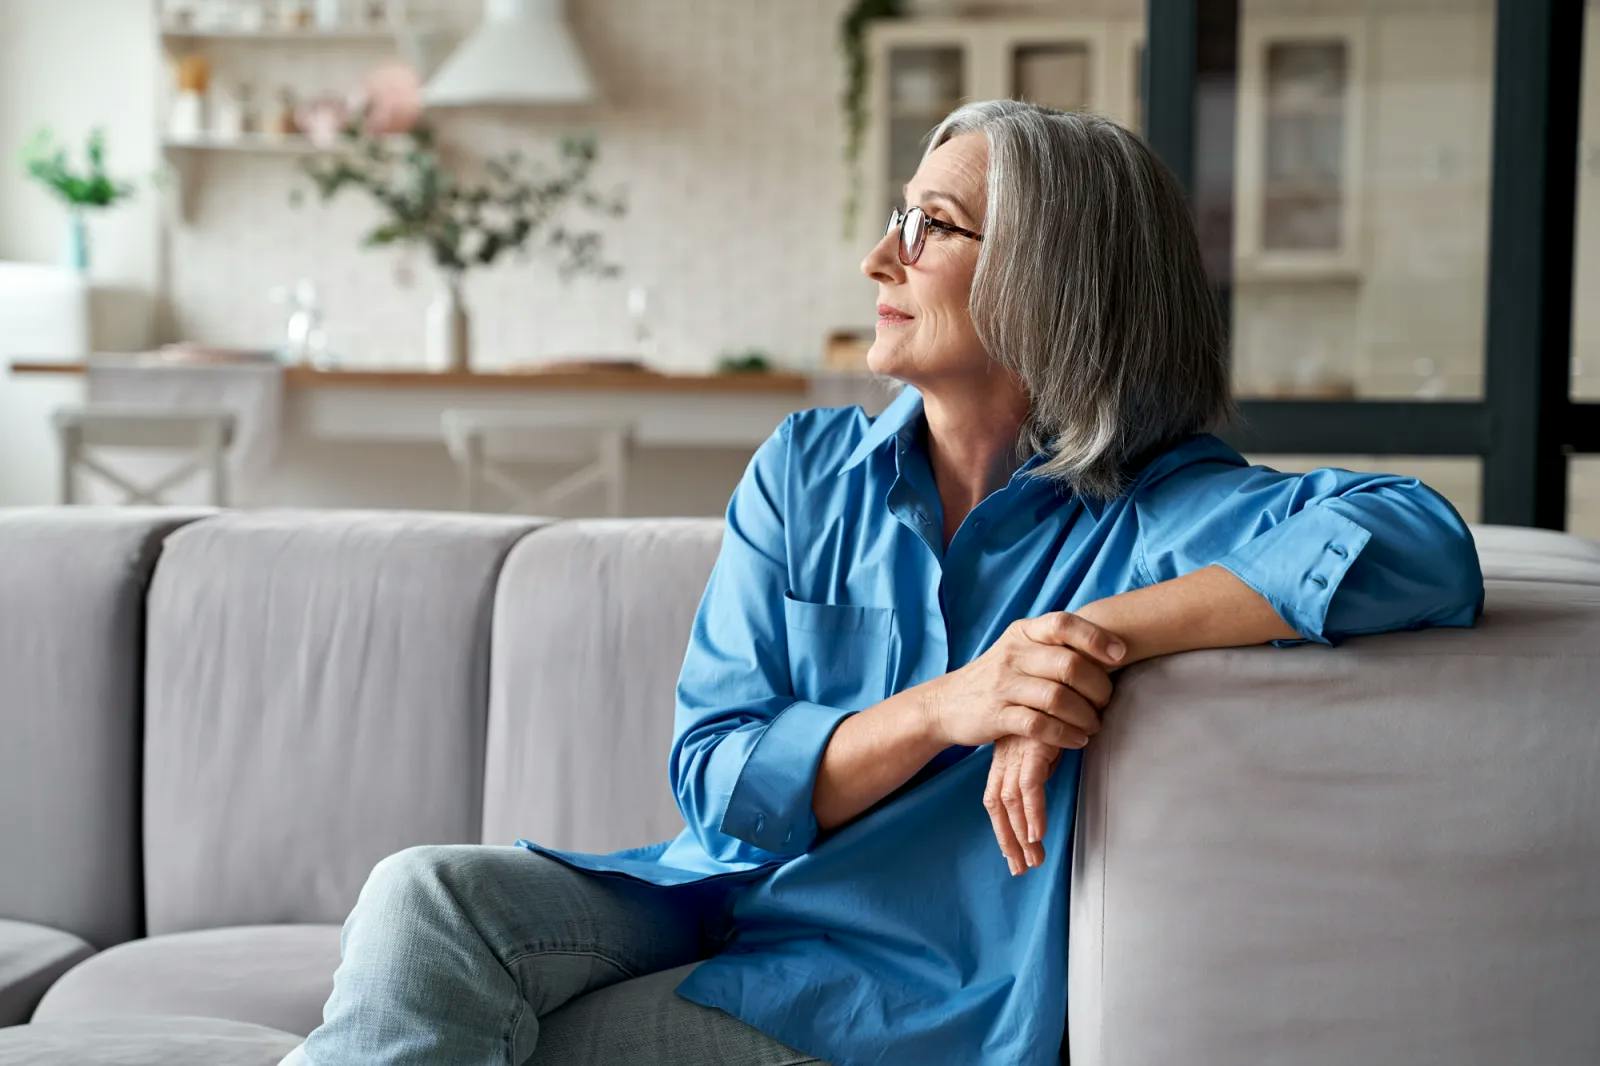 Mature woman sitting on couch looking at window